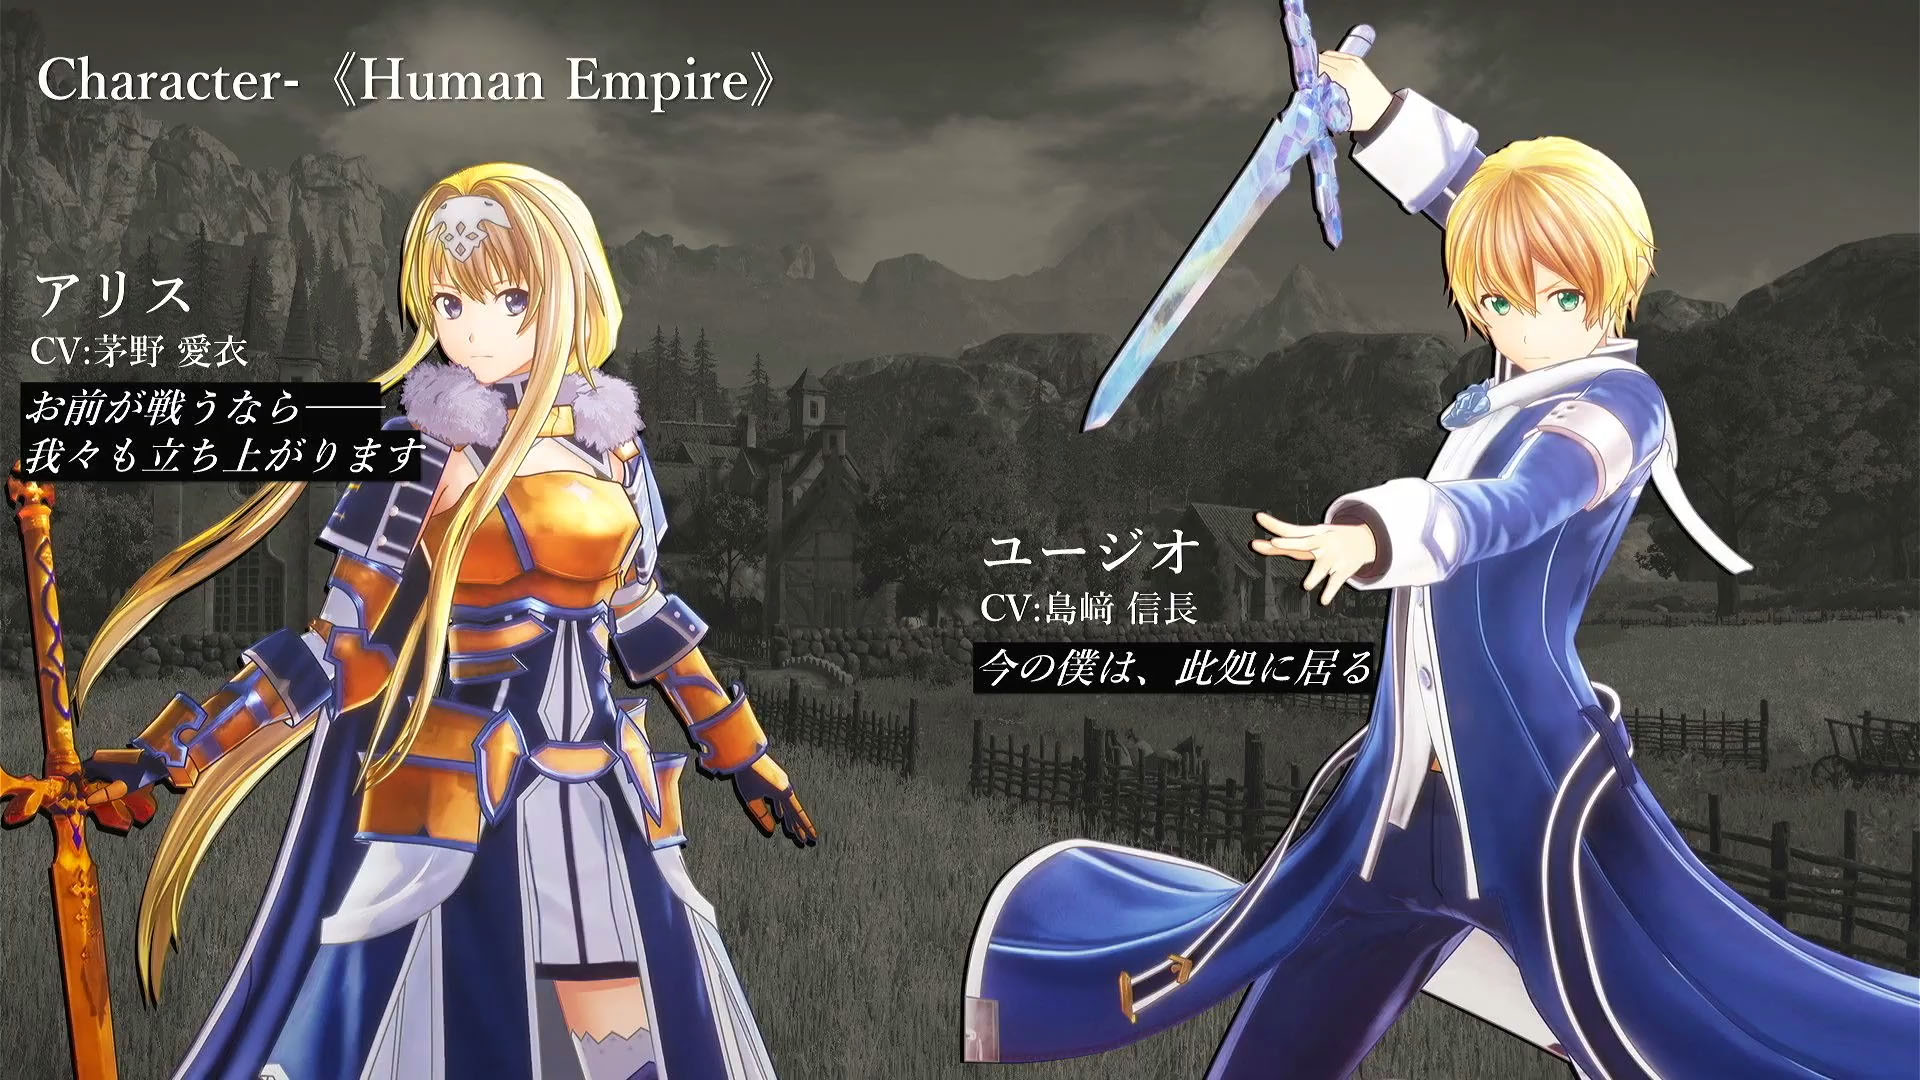 Duo Of Sword Art Online Games Coming To North America - Game Informer